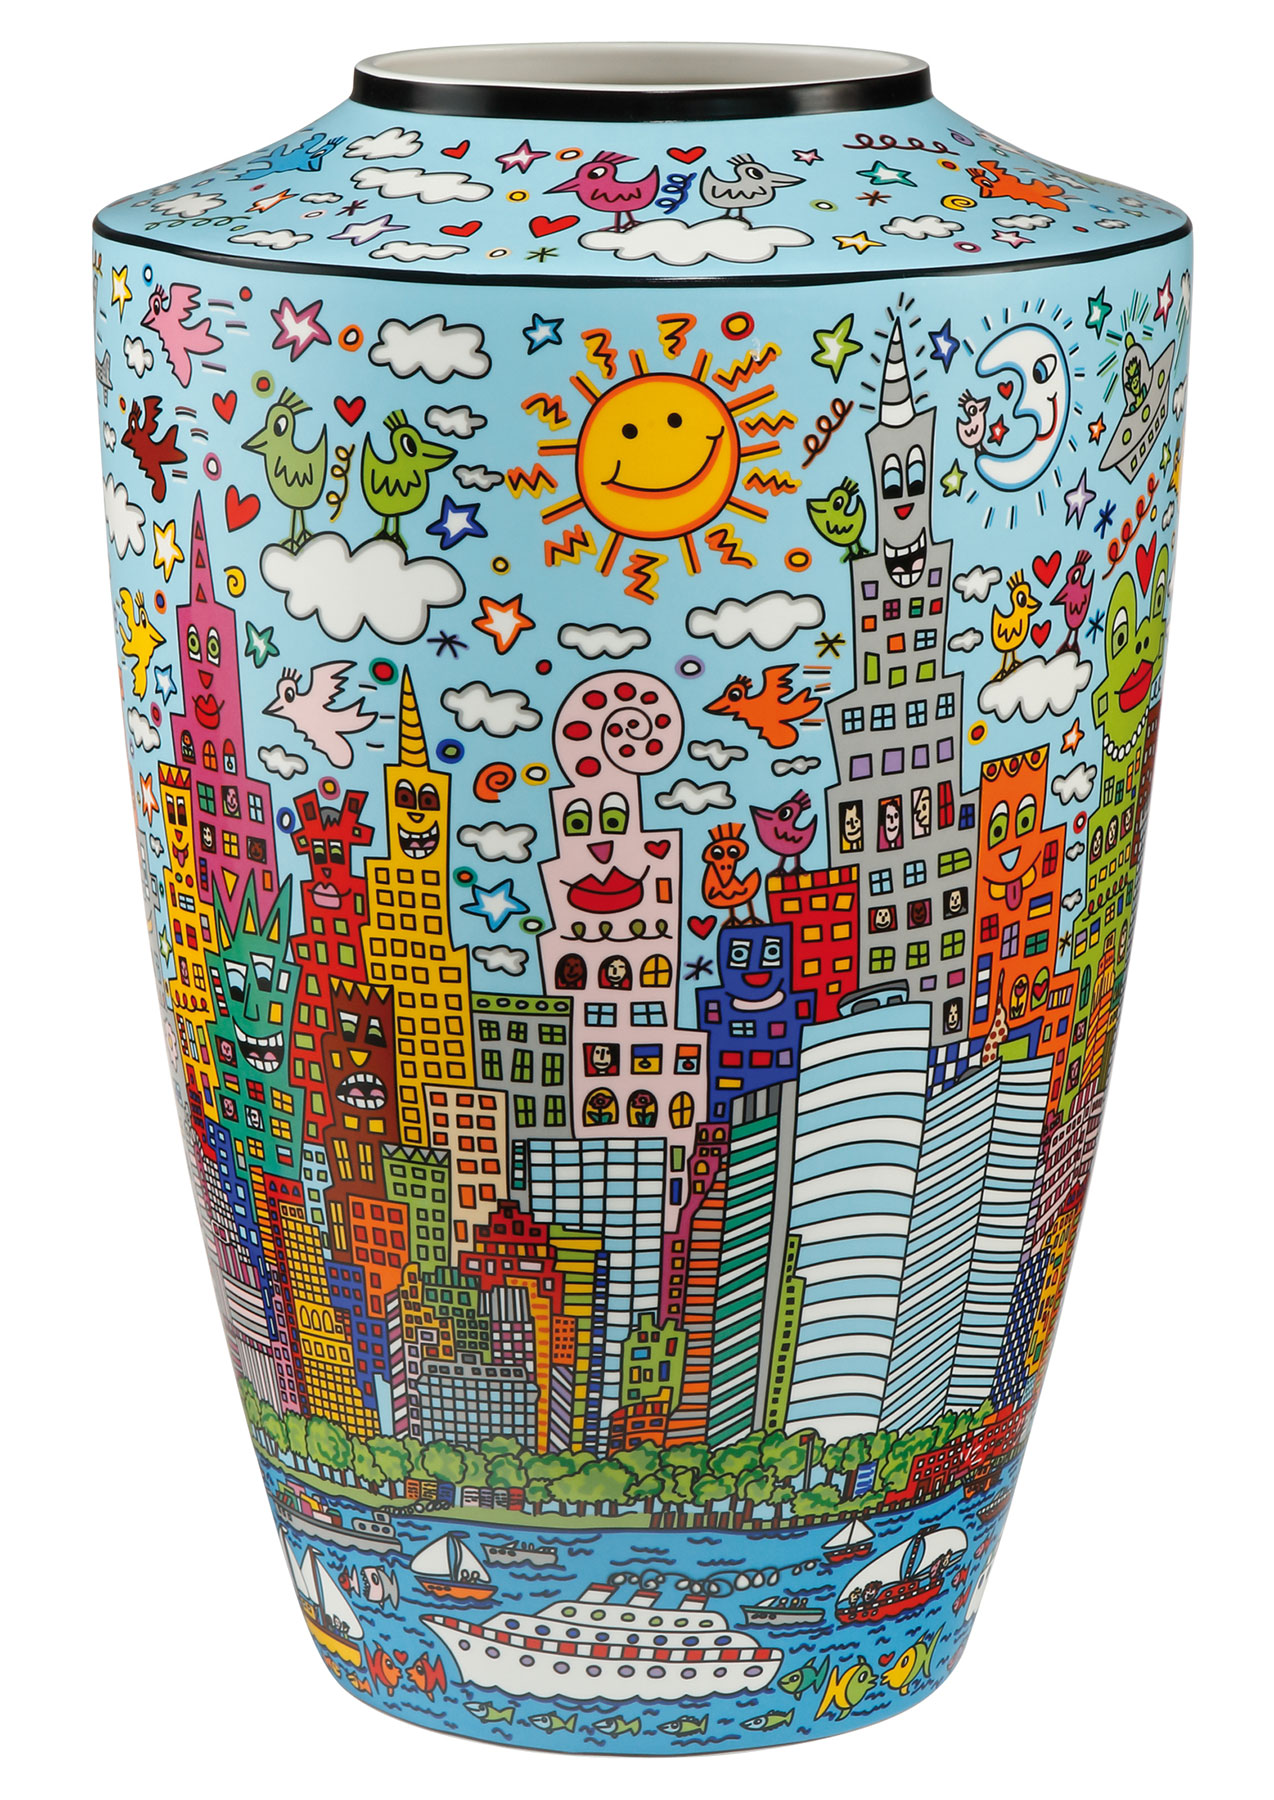 Porcelain vase "My New York City Day" by James Rizzi